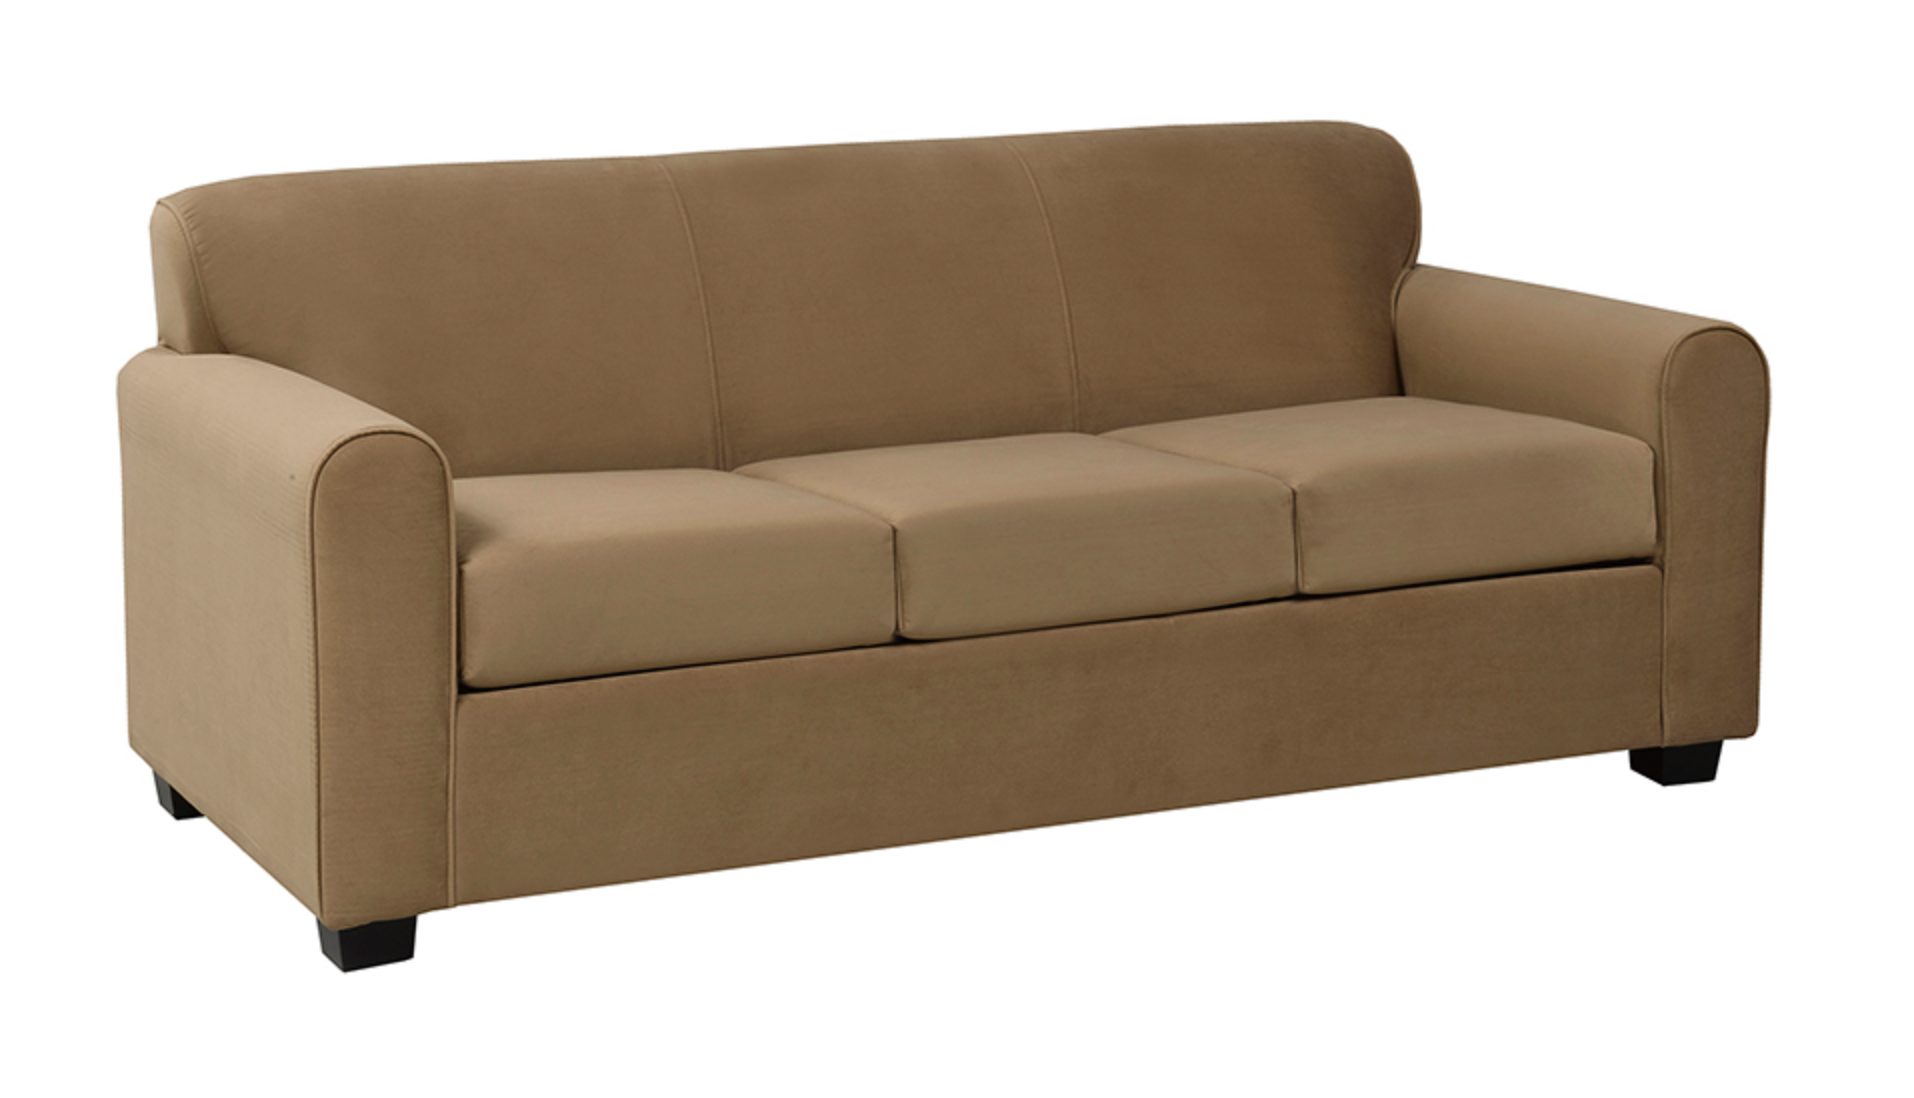 Troy Double Sofa Bed - Tan